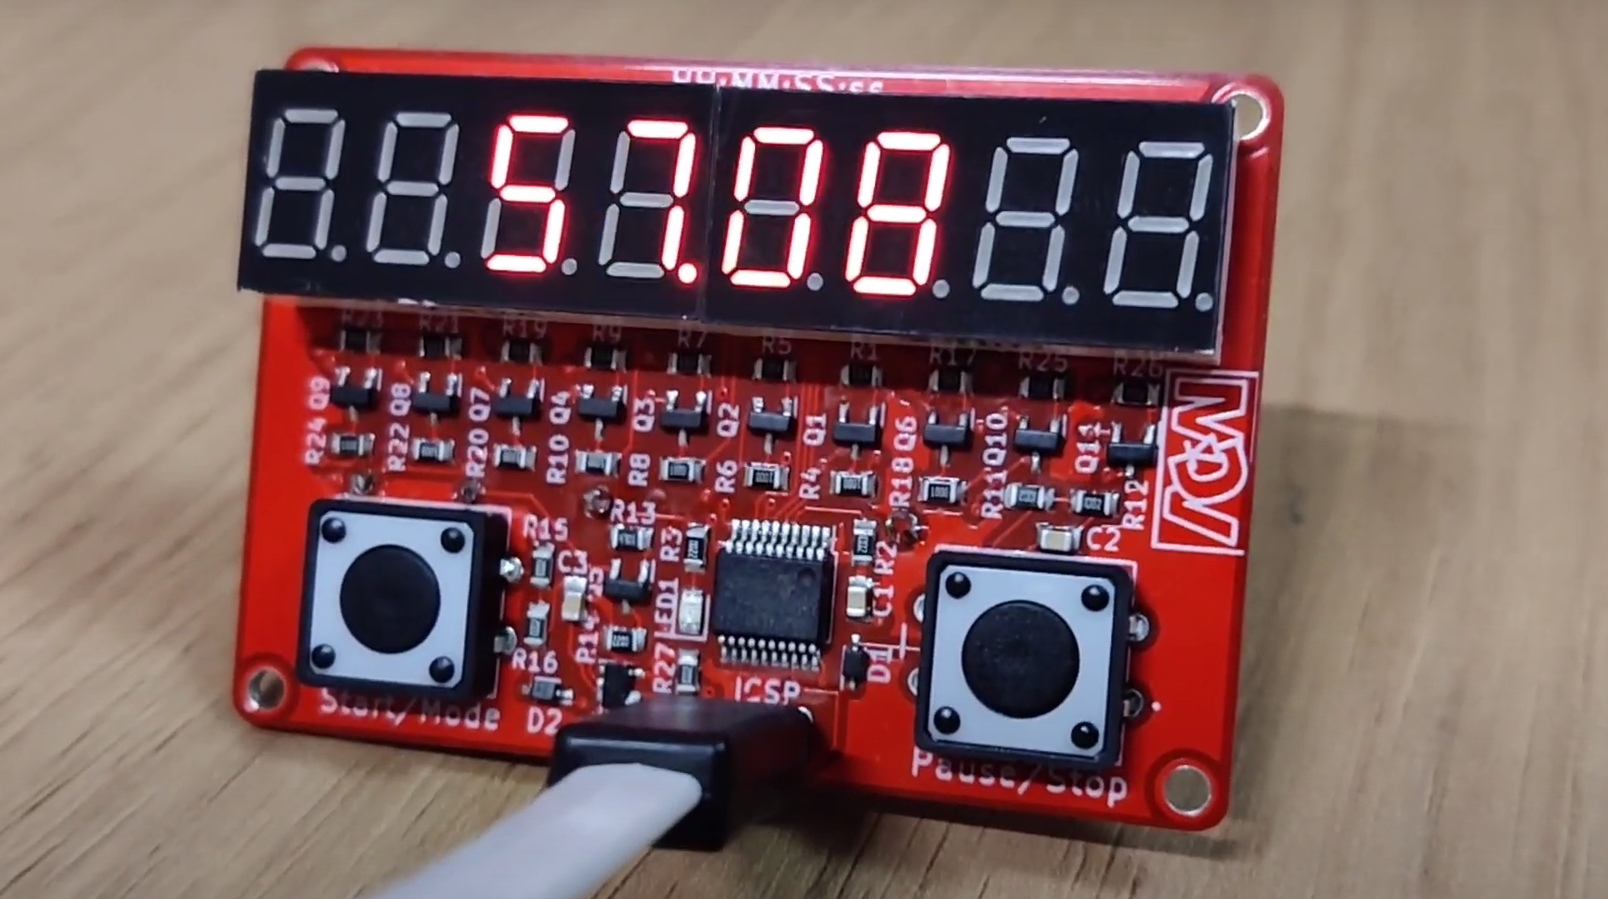 Add an OSHW certified stopwatch to your toolbox